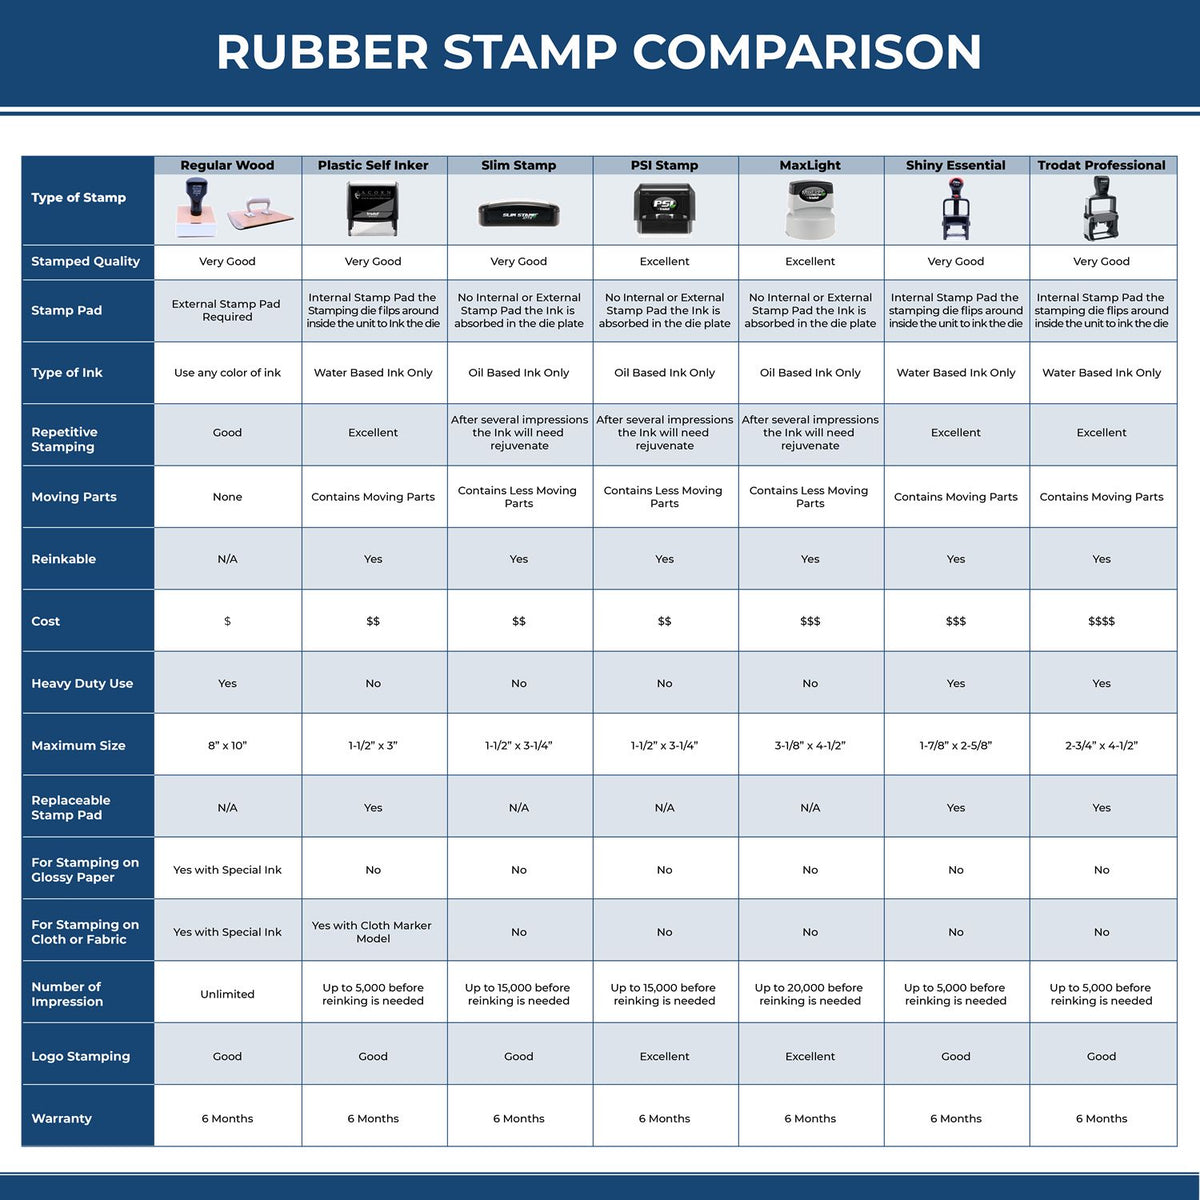 A comparison chart for the different types of mount models available for the Premium MaxLight Pre-Inked Iowa Engineering Stamp.